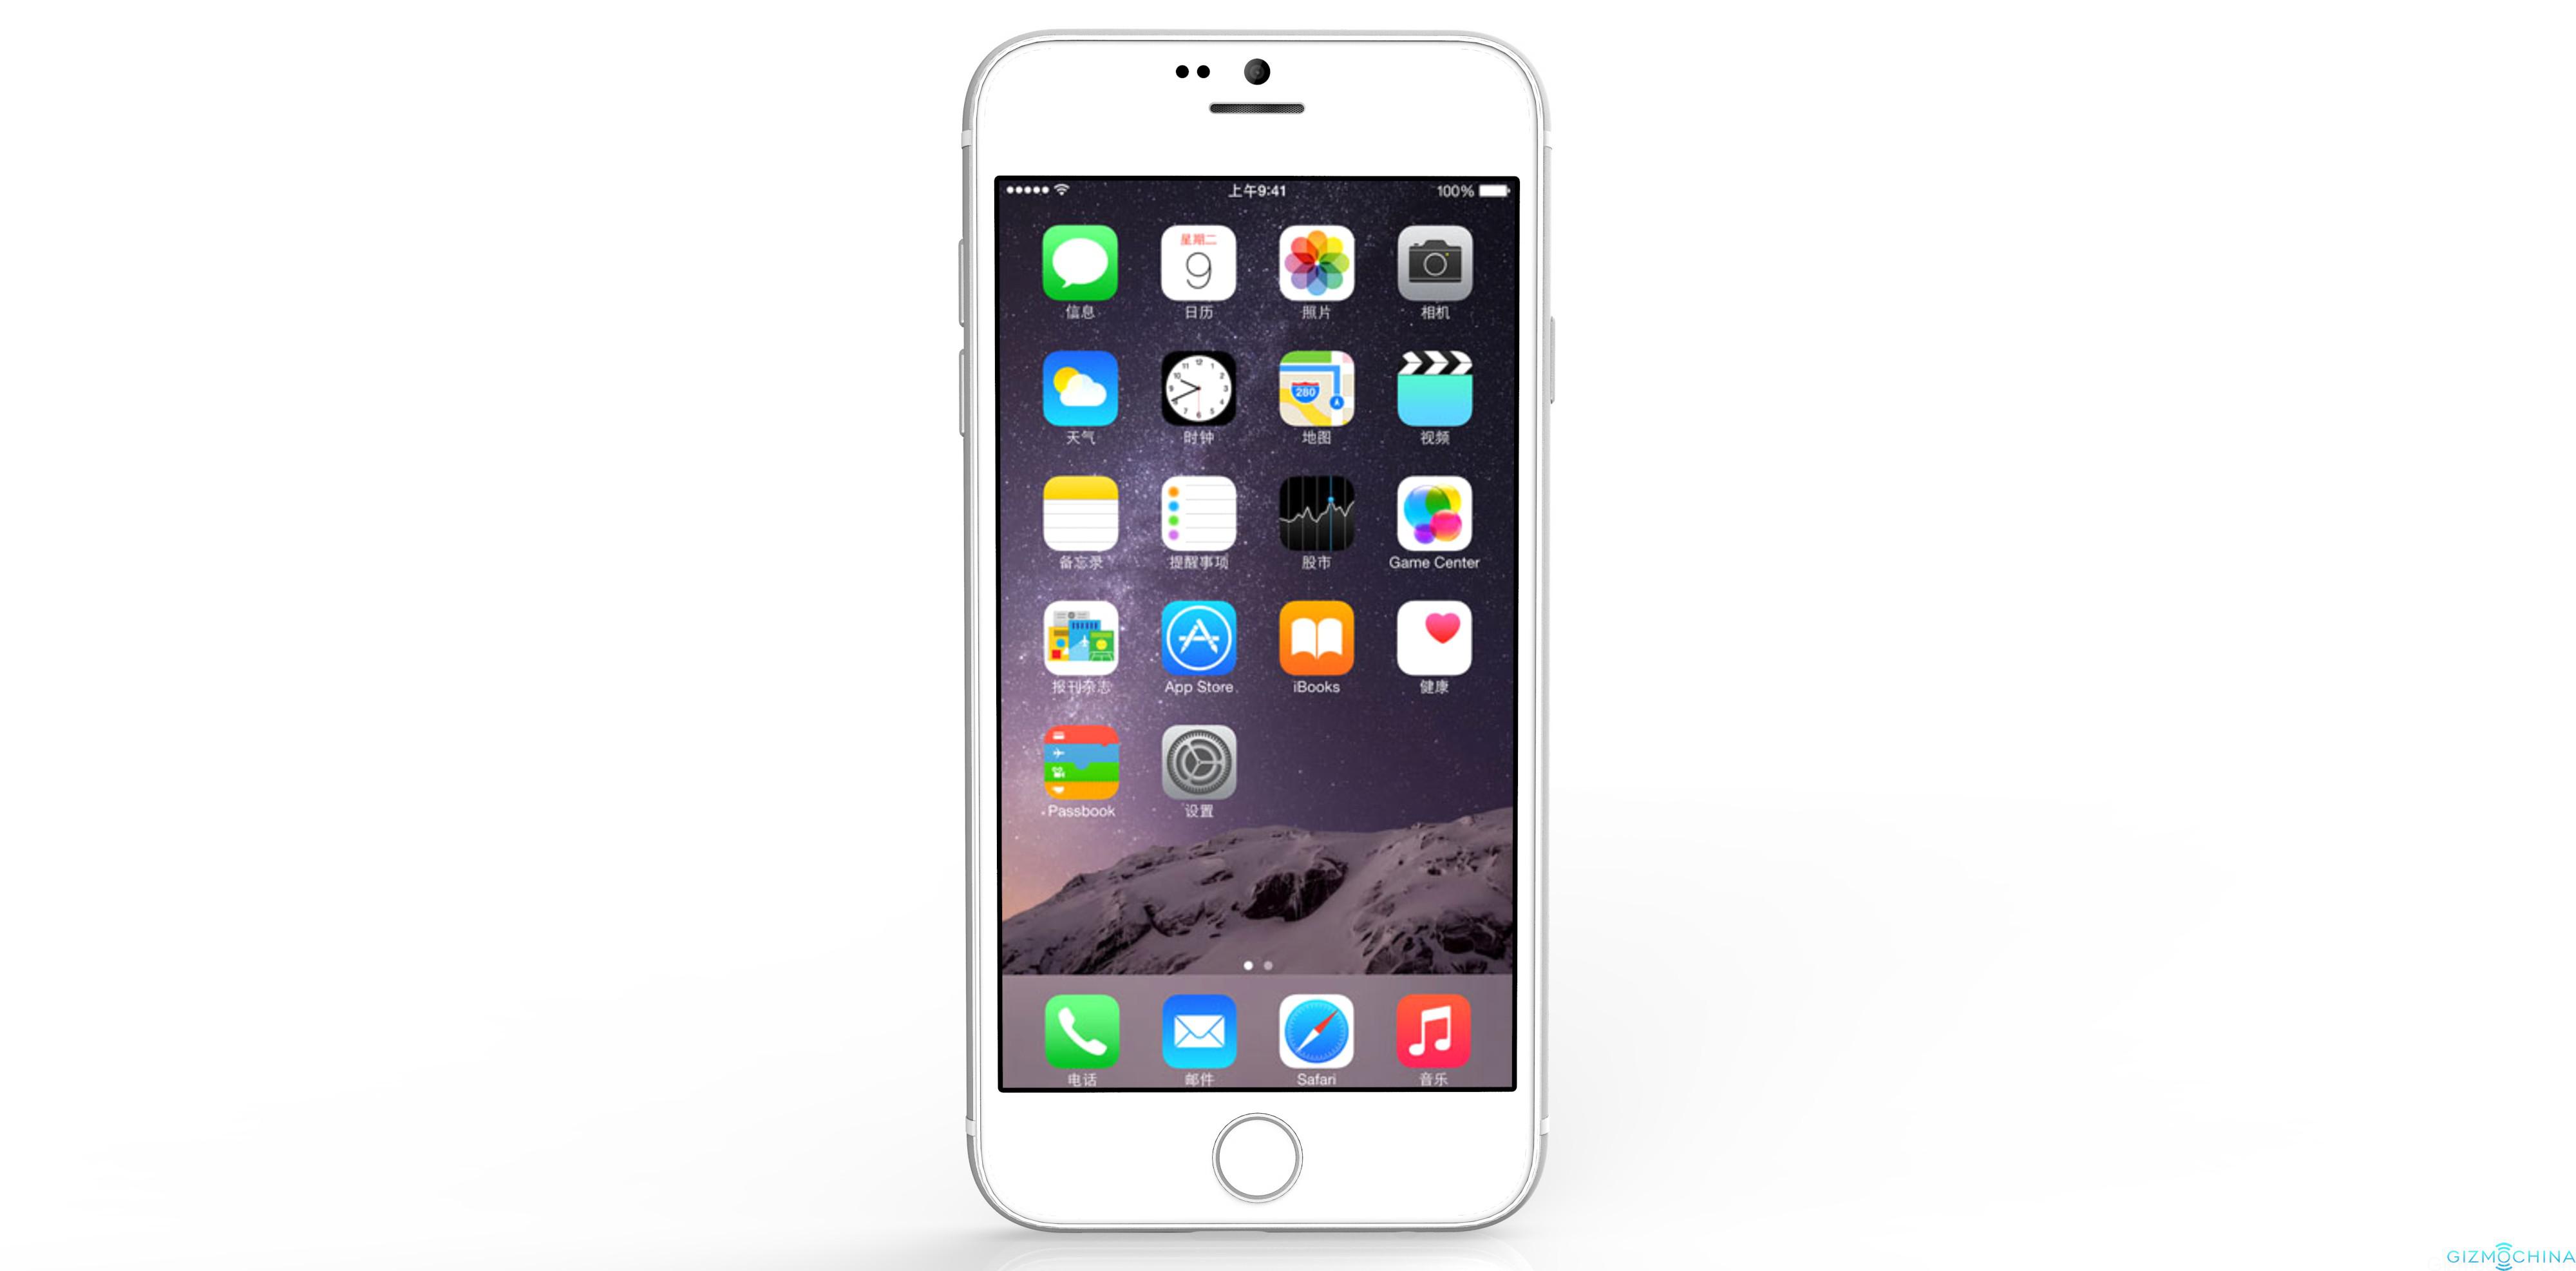 Blackview Ultra the iPhone 6 clone comes with an iOS like 